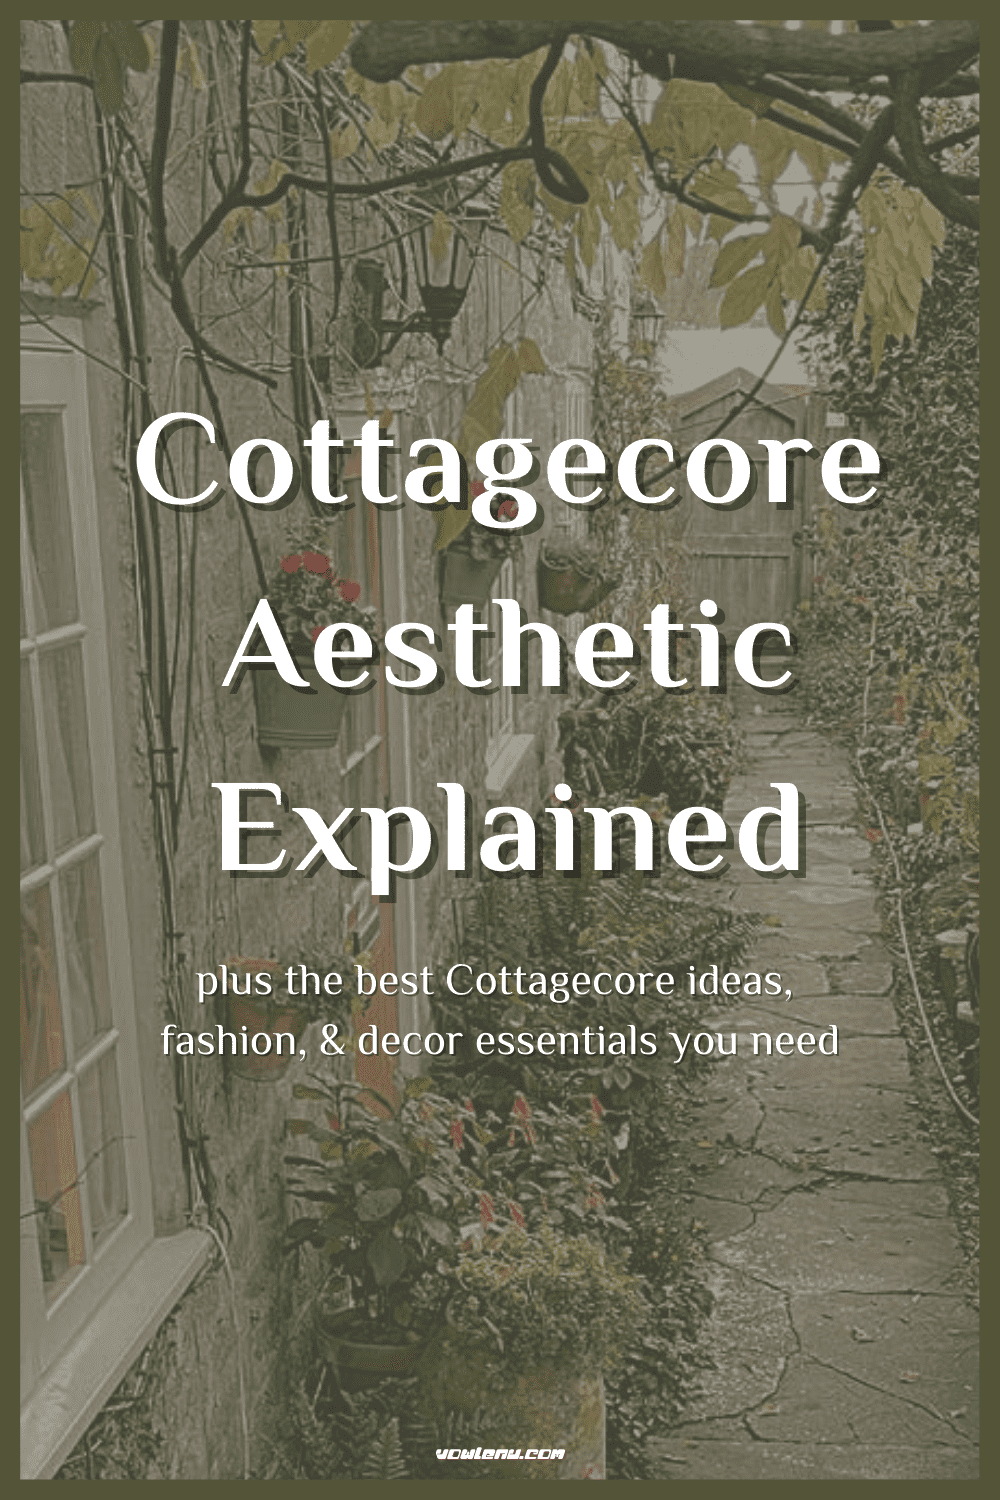 Cottagecore Aesthetic Explained plus the best Cottagecore ideas, fashion, & decor essentials you need in 2022